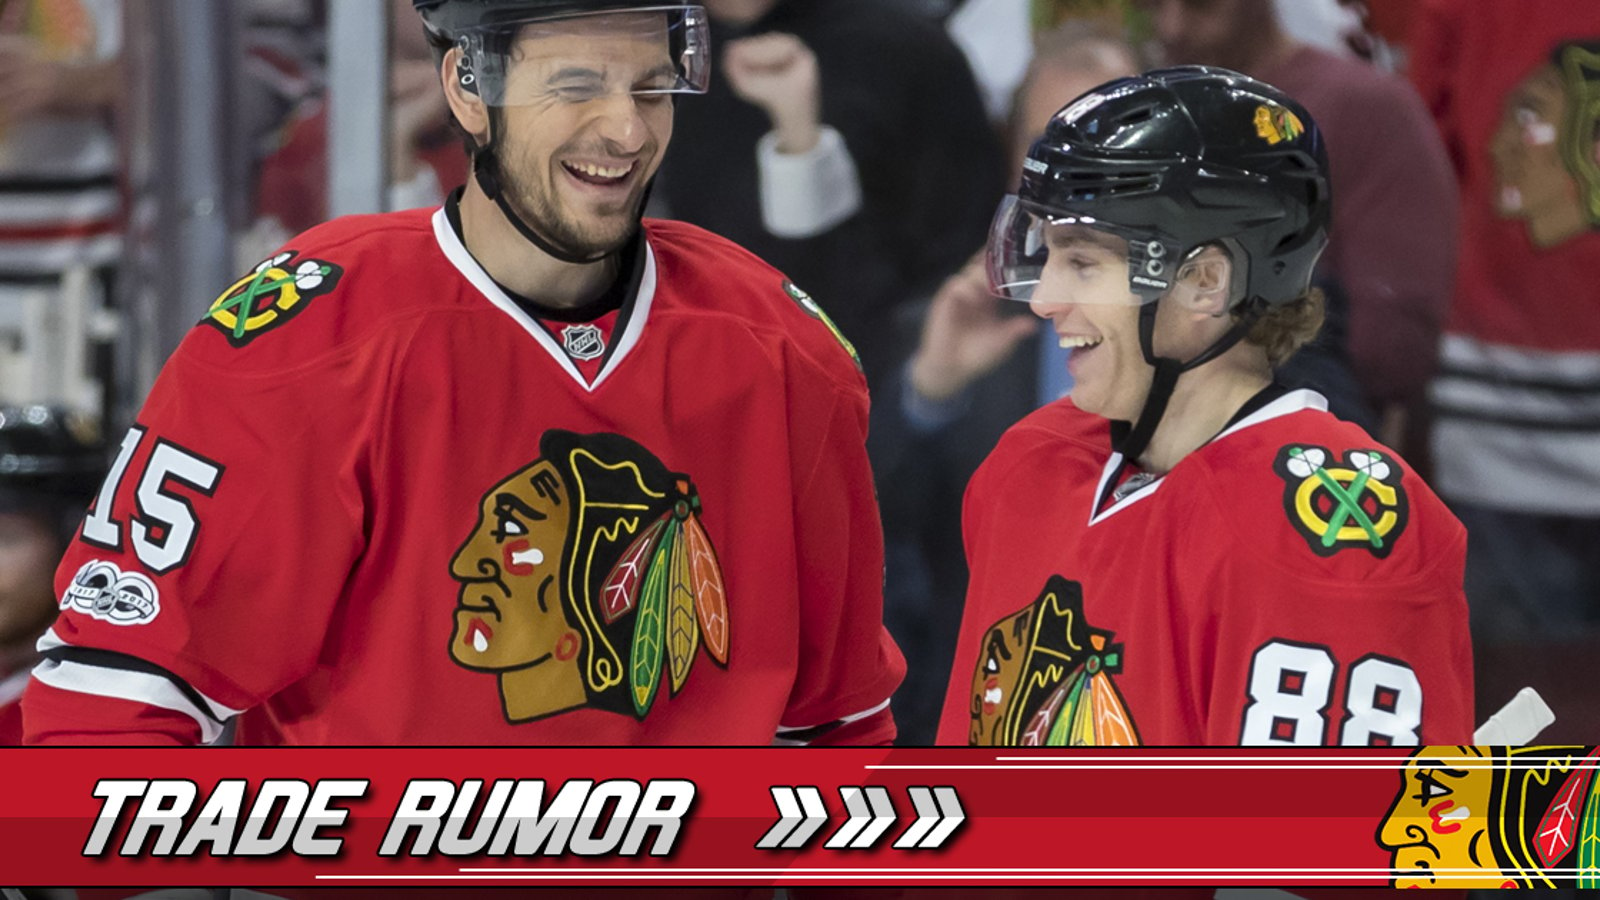 IMPORTANT trade rumor emerges out of Chicago to clear cap space.